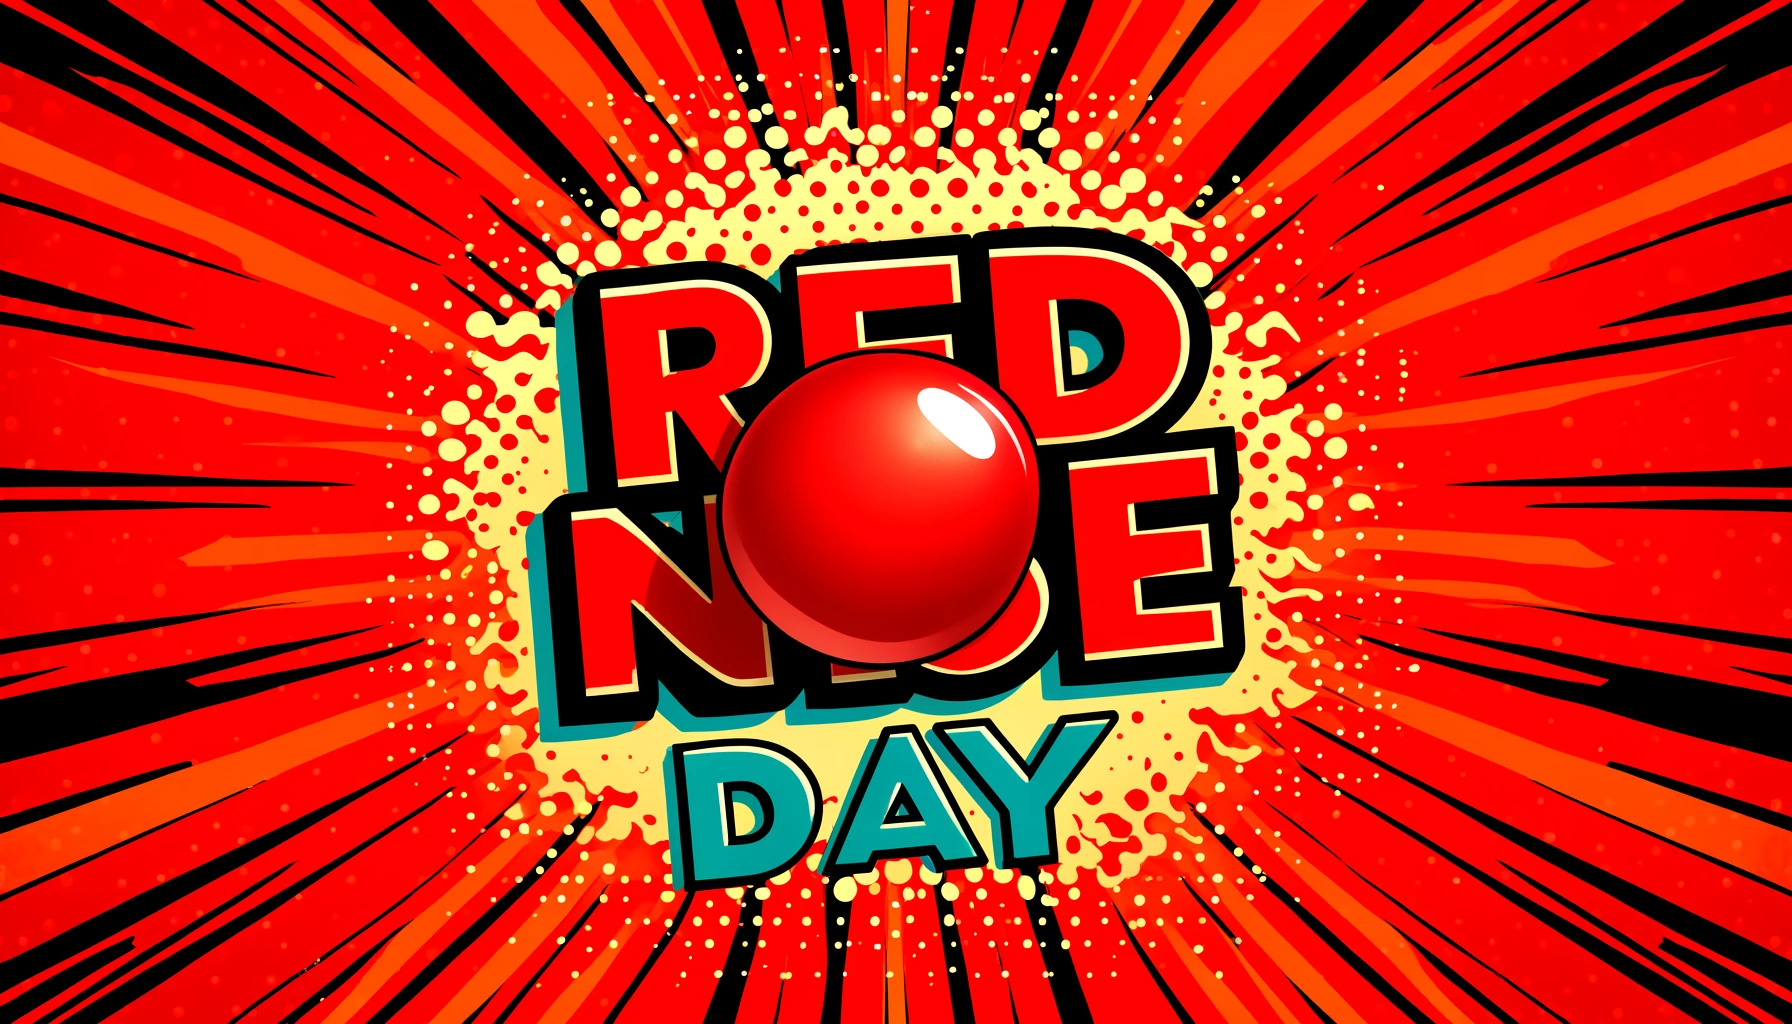 Cheerful Red Nose Day Quotes to Brighten Up the Day